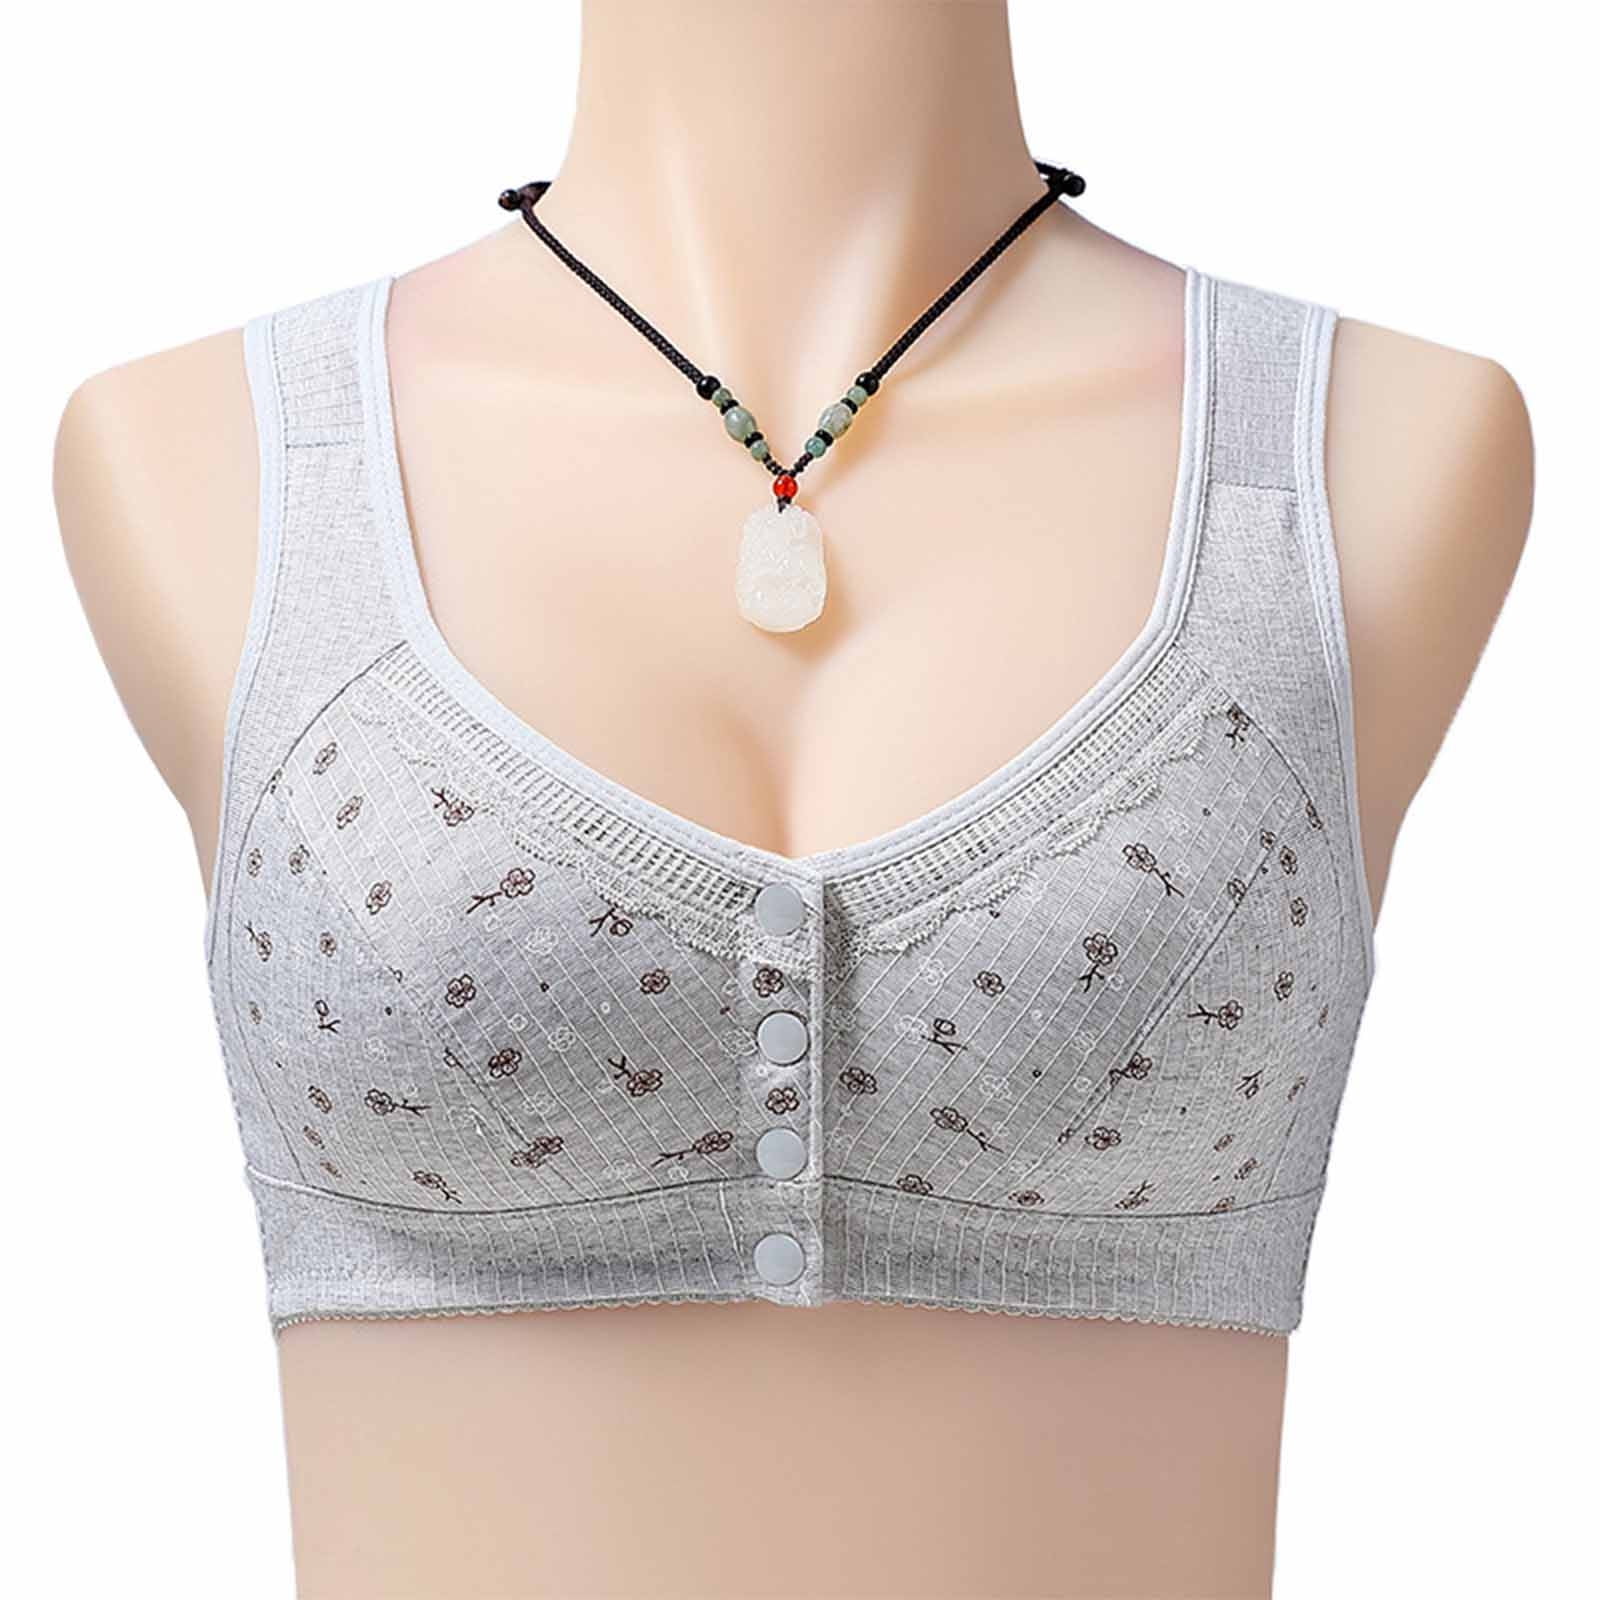  Womens Front Closure Bras Plus Size Lace Full Coverage  Underwire Unlined Bra Sargasso 46C